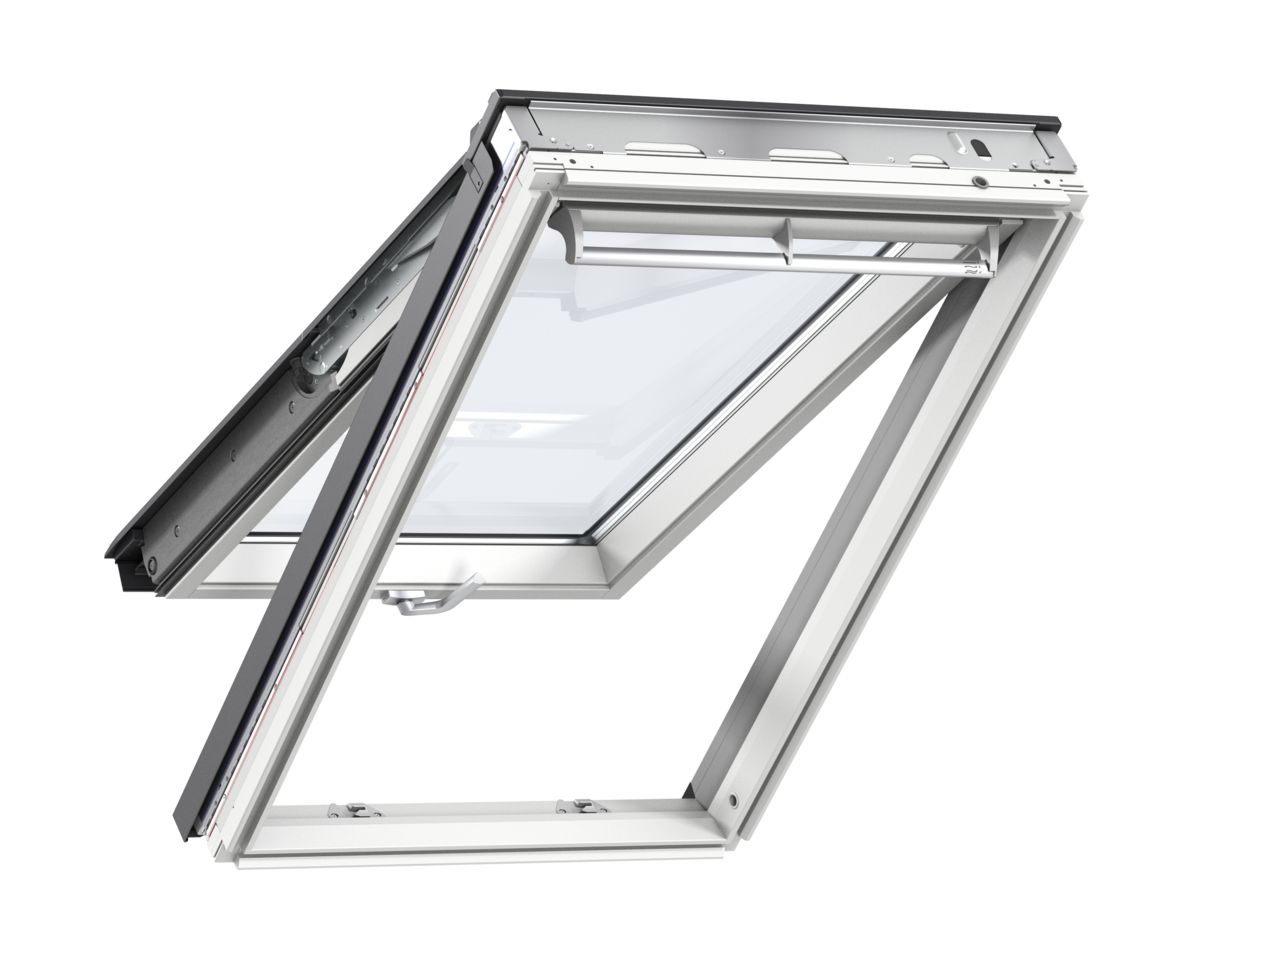 Velux GPL MK06 780 x 1180mm Top Hung 66Pane Roof Window - White Painted